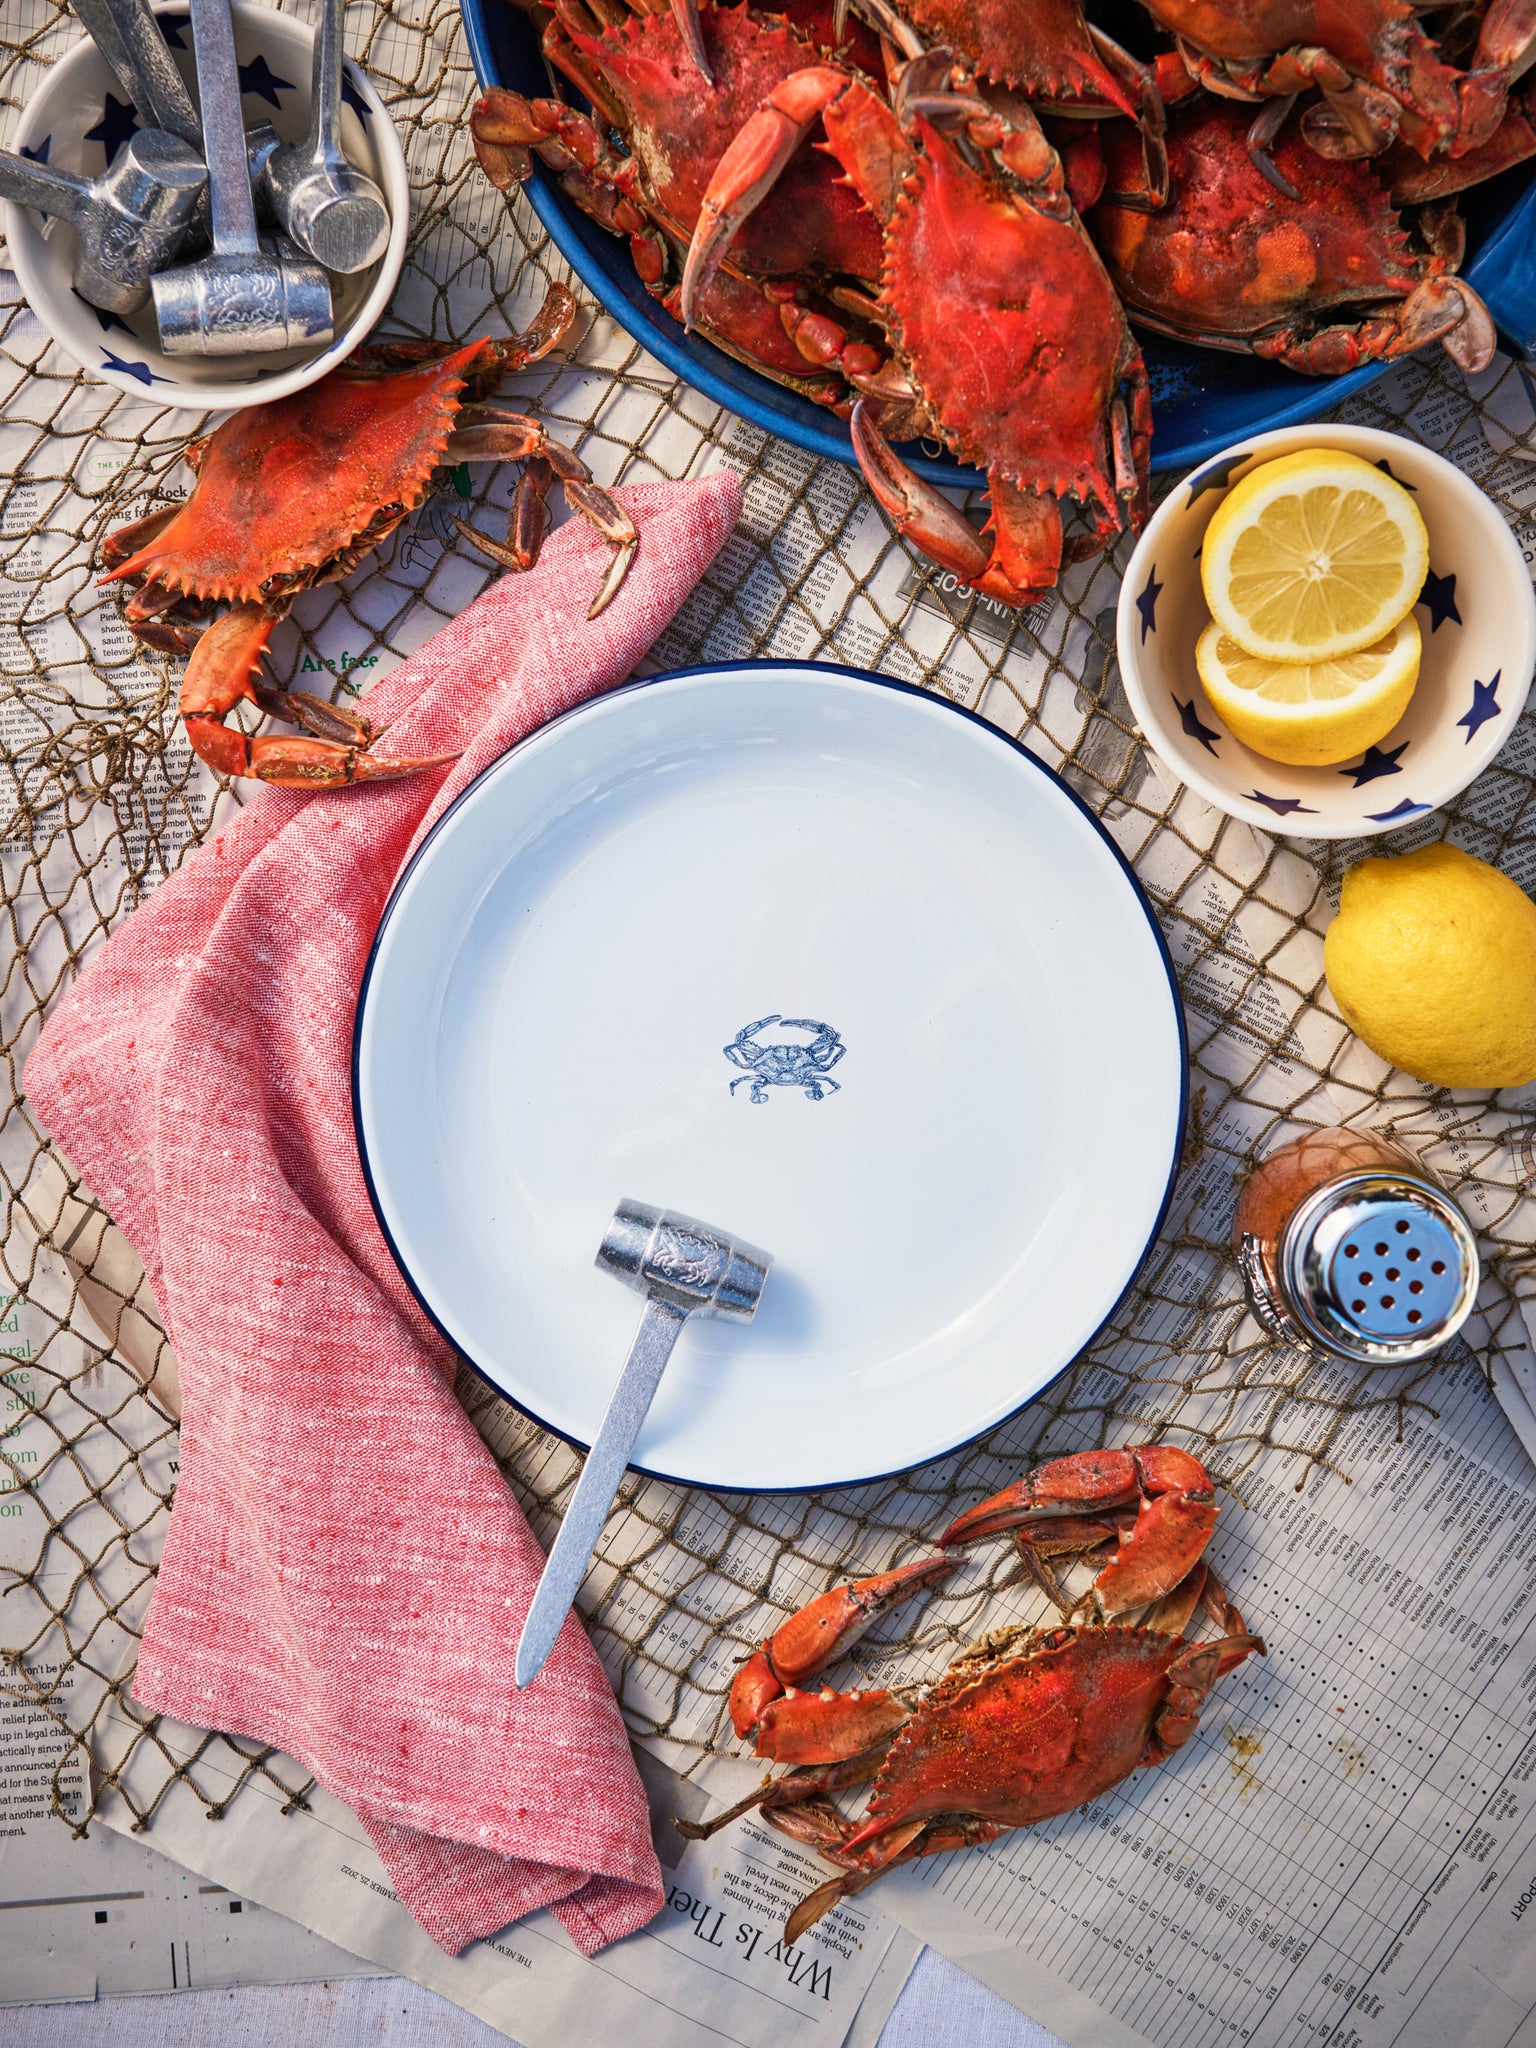 Crow Canyon Crab Dinner Plate Weston Table